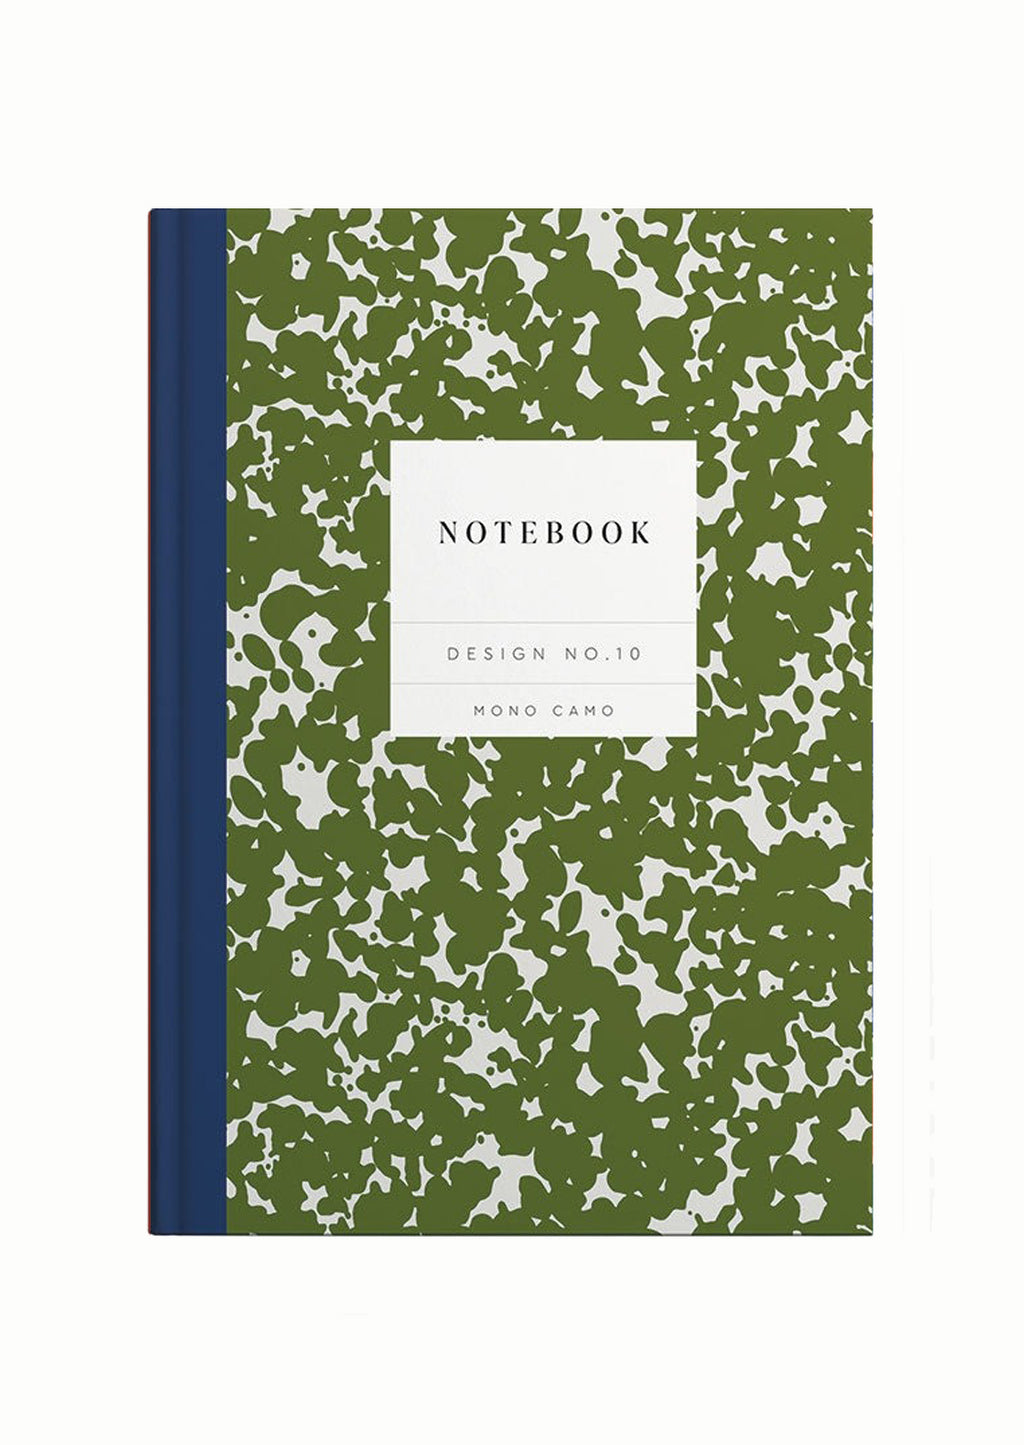 Mono Camo: A hardcover notebook with navy blue spine and olive green camo print cover.